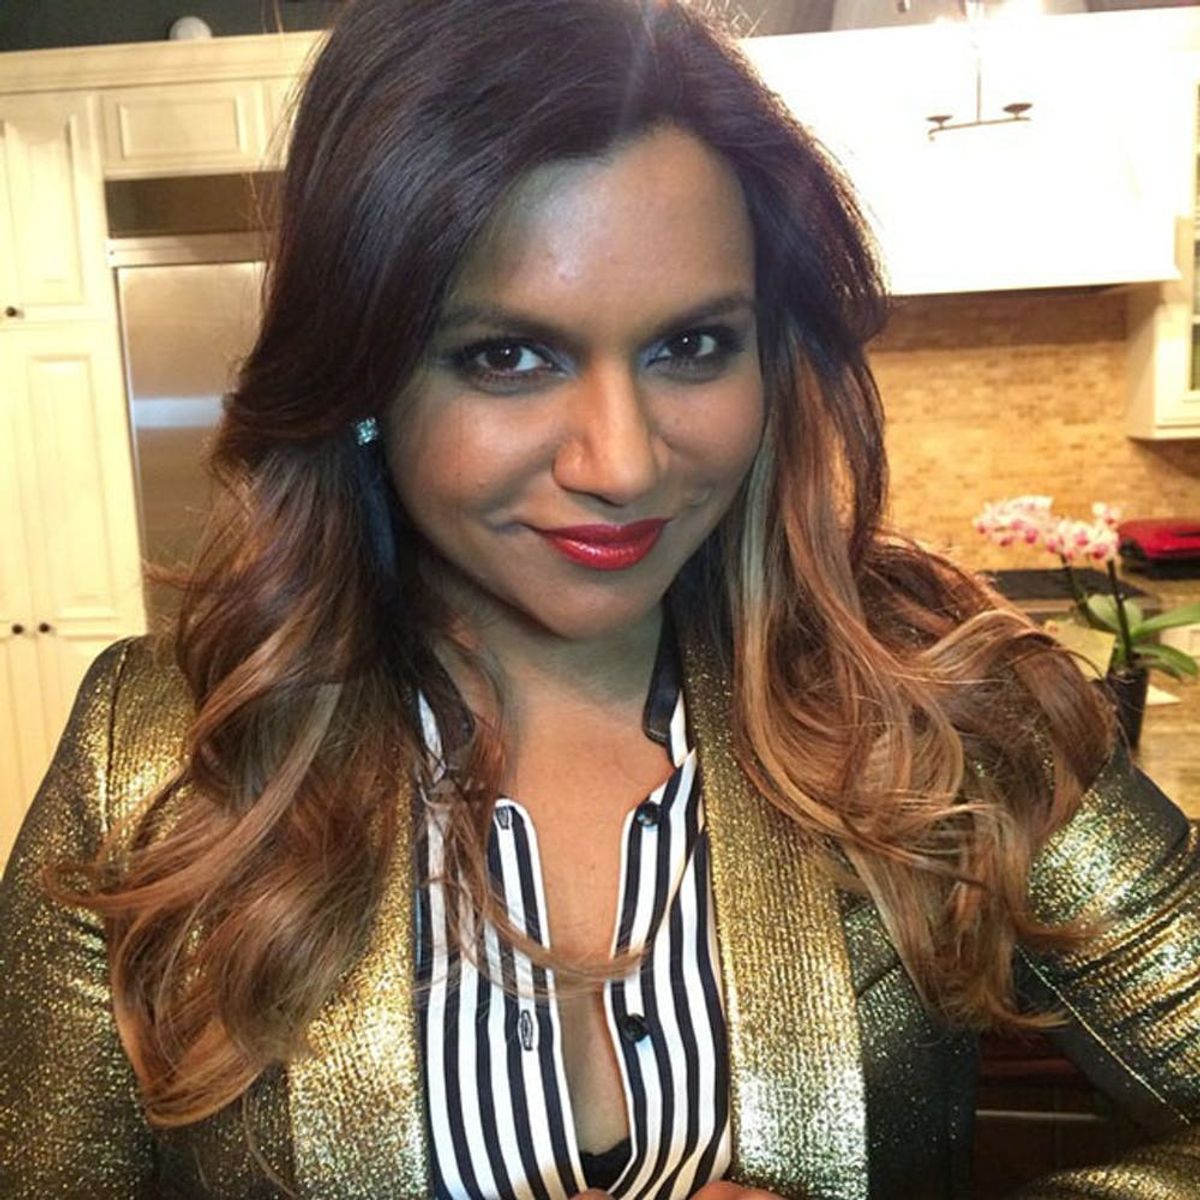 What Do You Think of Mindy Kaling’s New Blonde ‘Do?